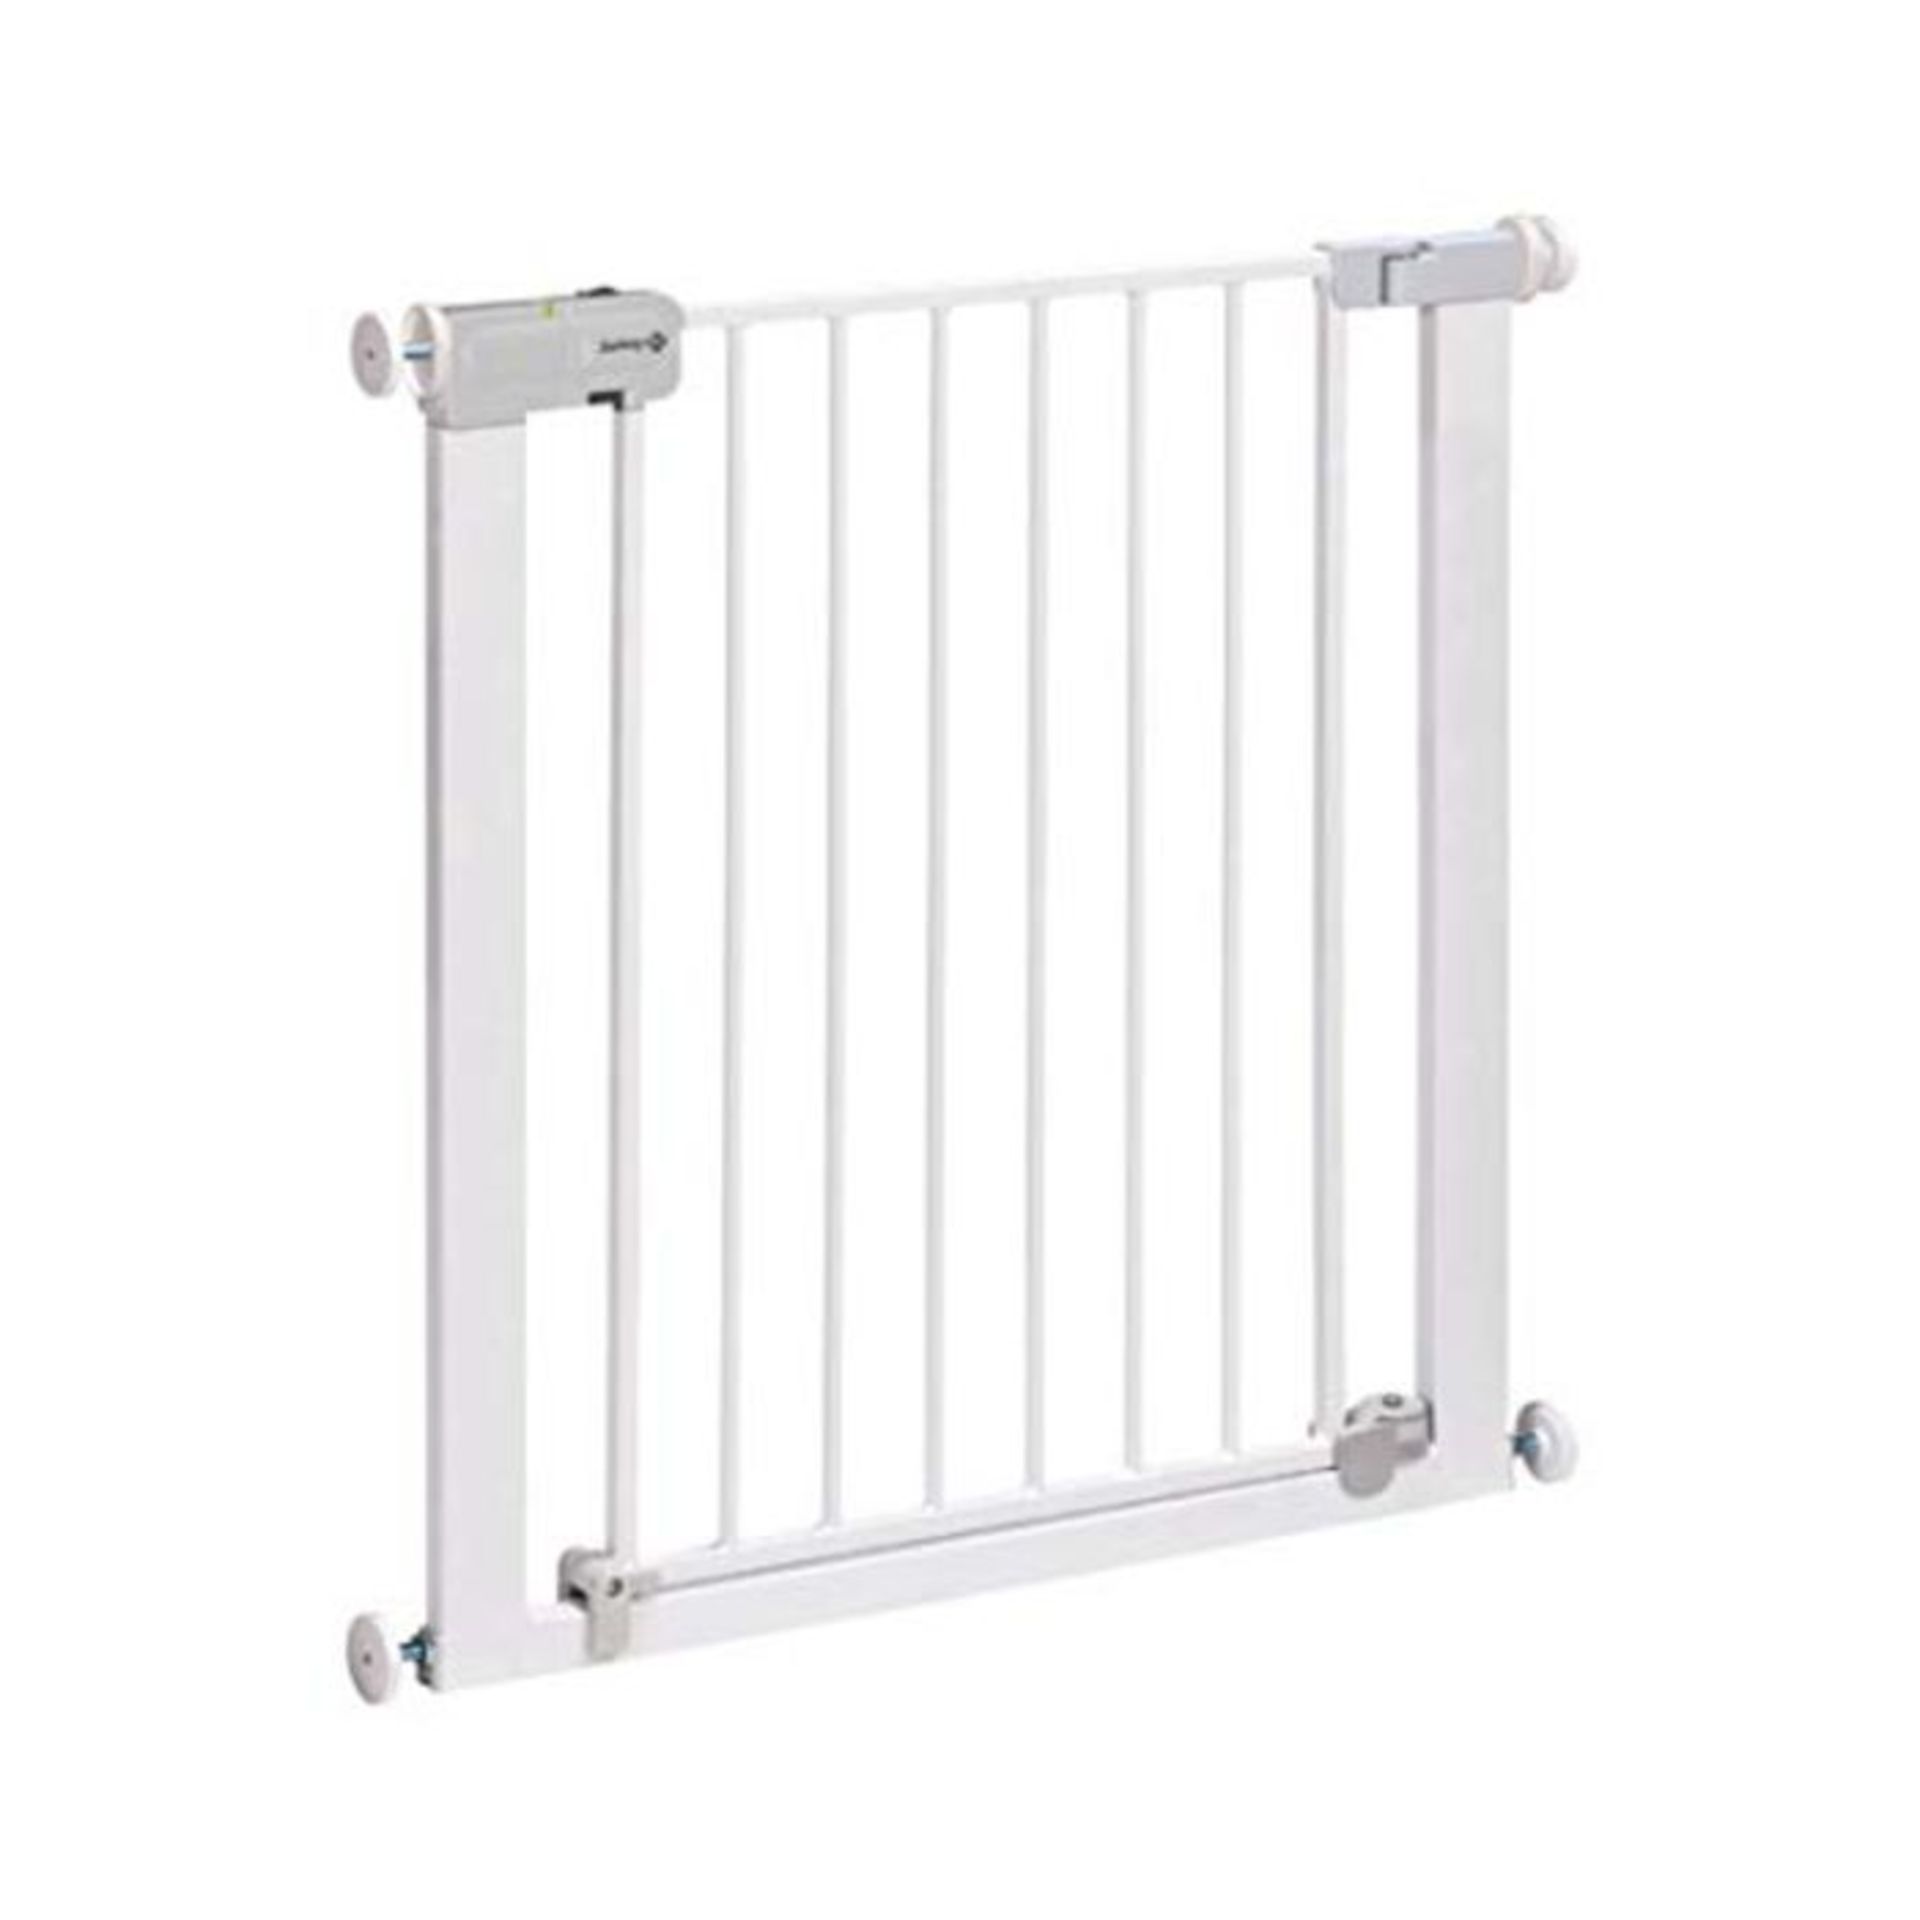 Safety 1st Securtech Auto-Close Metal Gate, Easy to Use, Quick and Easy to Install. 6-